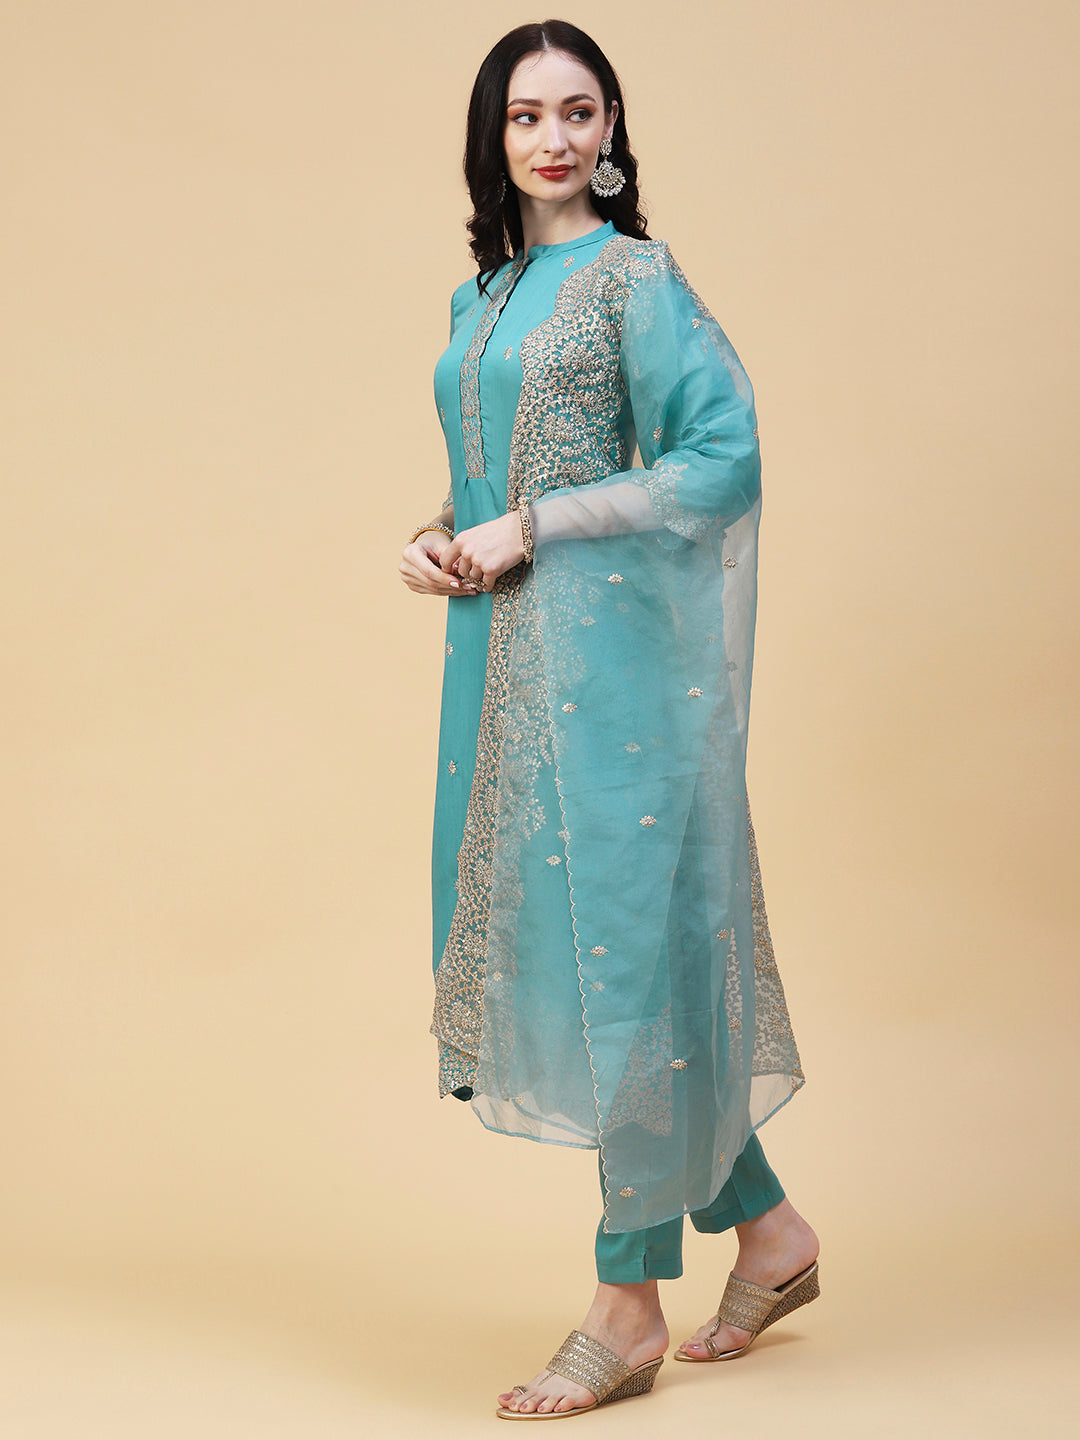 Solid Resham & Sequins Embroidered Scallop Kurta With Pants & Dupatta - Light Teal Blue